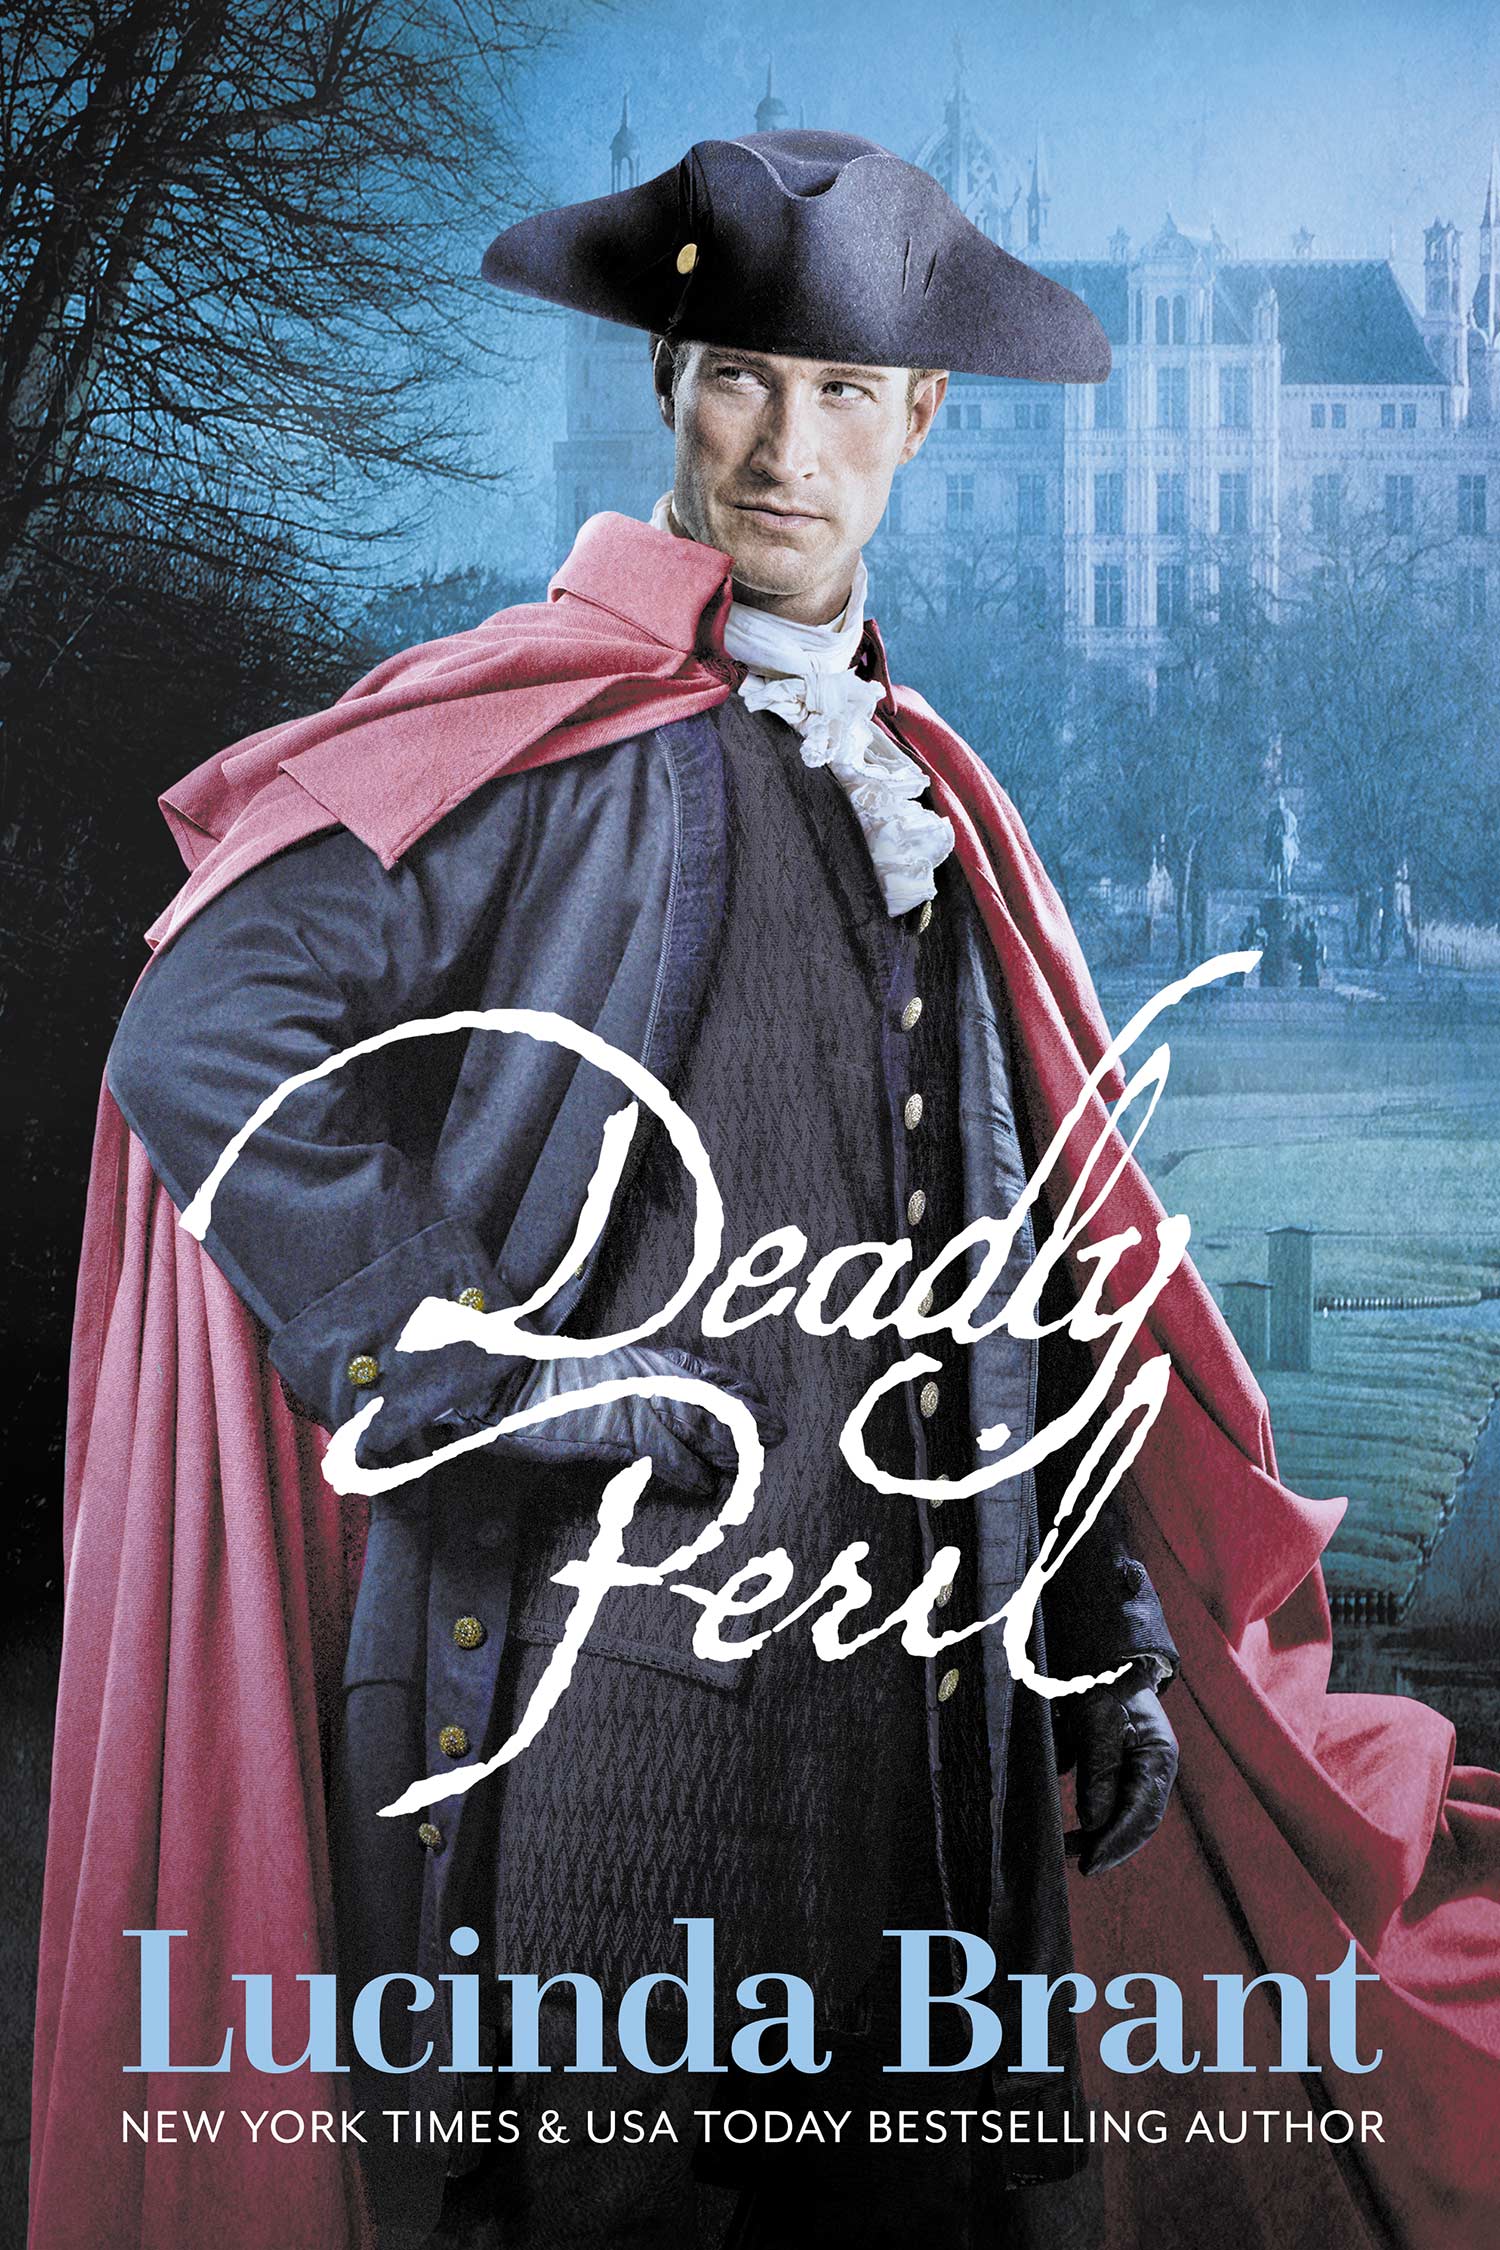 Deadly Peril: A Georgian Historical Mystery (Alec Halsey Mystery Book 3) by Lucinda Brant